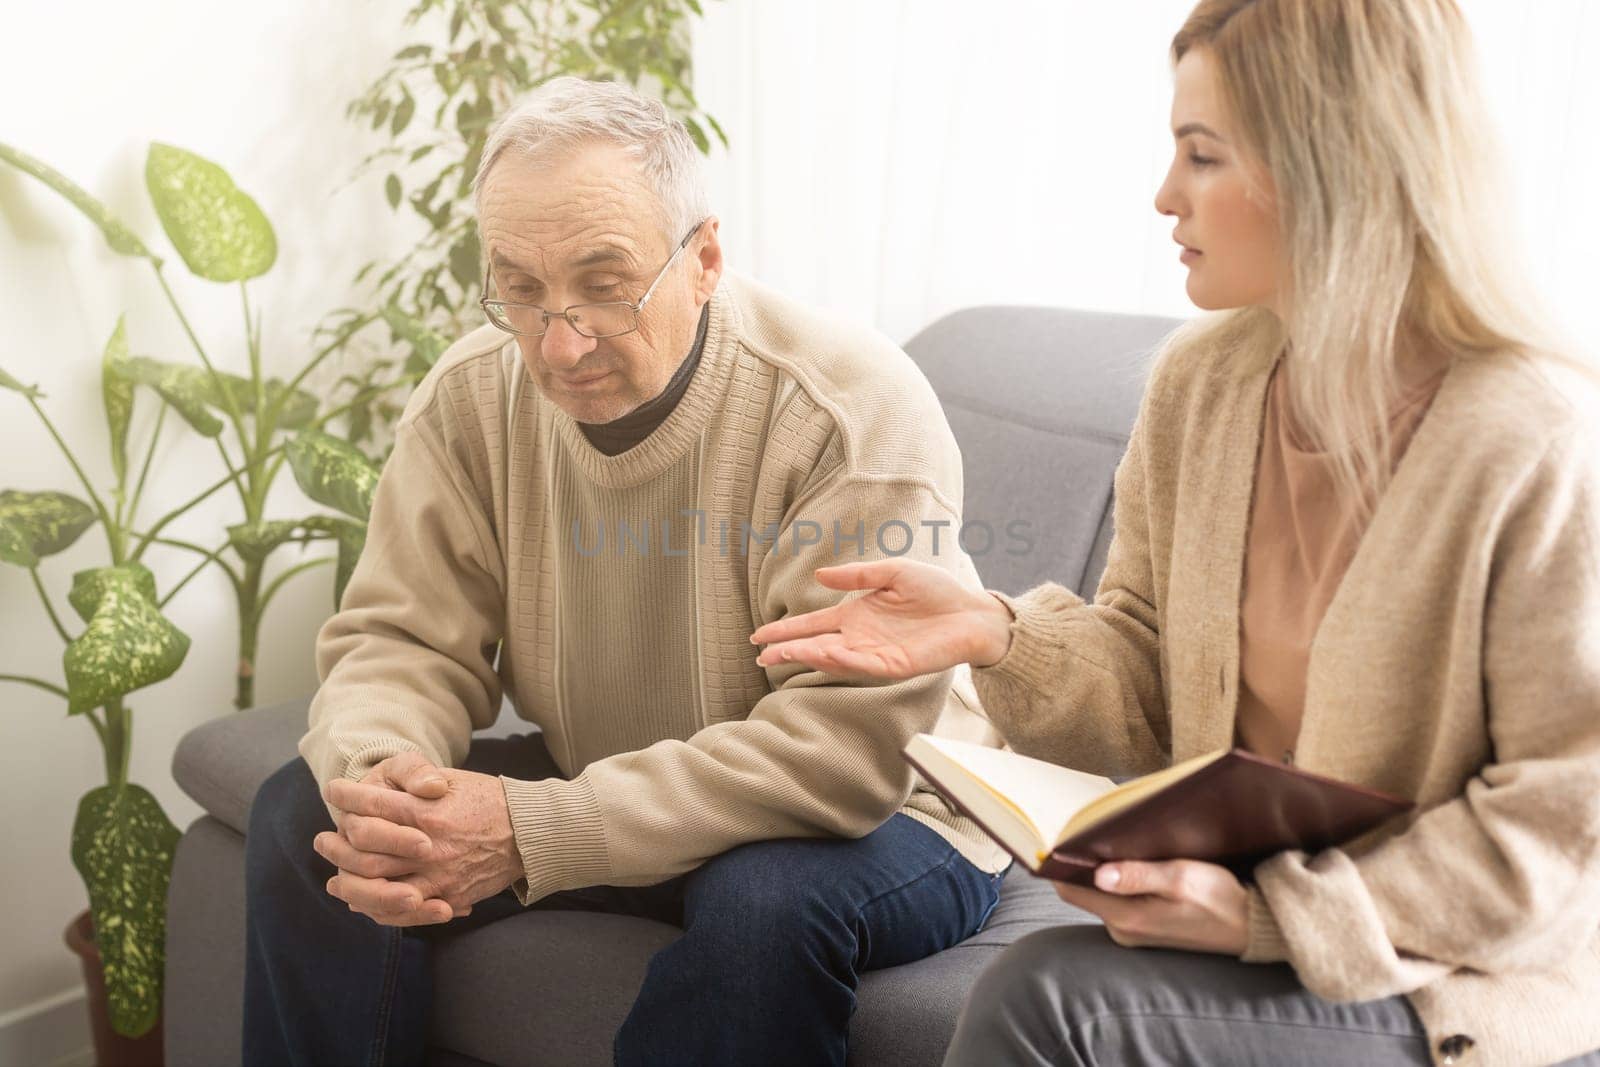 Close up anxious serious old man listening to female doctor at meeting in hospital, therapist physician consulting mature patient about disease, treatment, elderly generation healthcare concept.